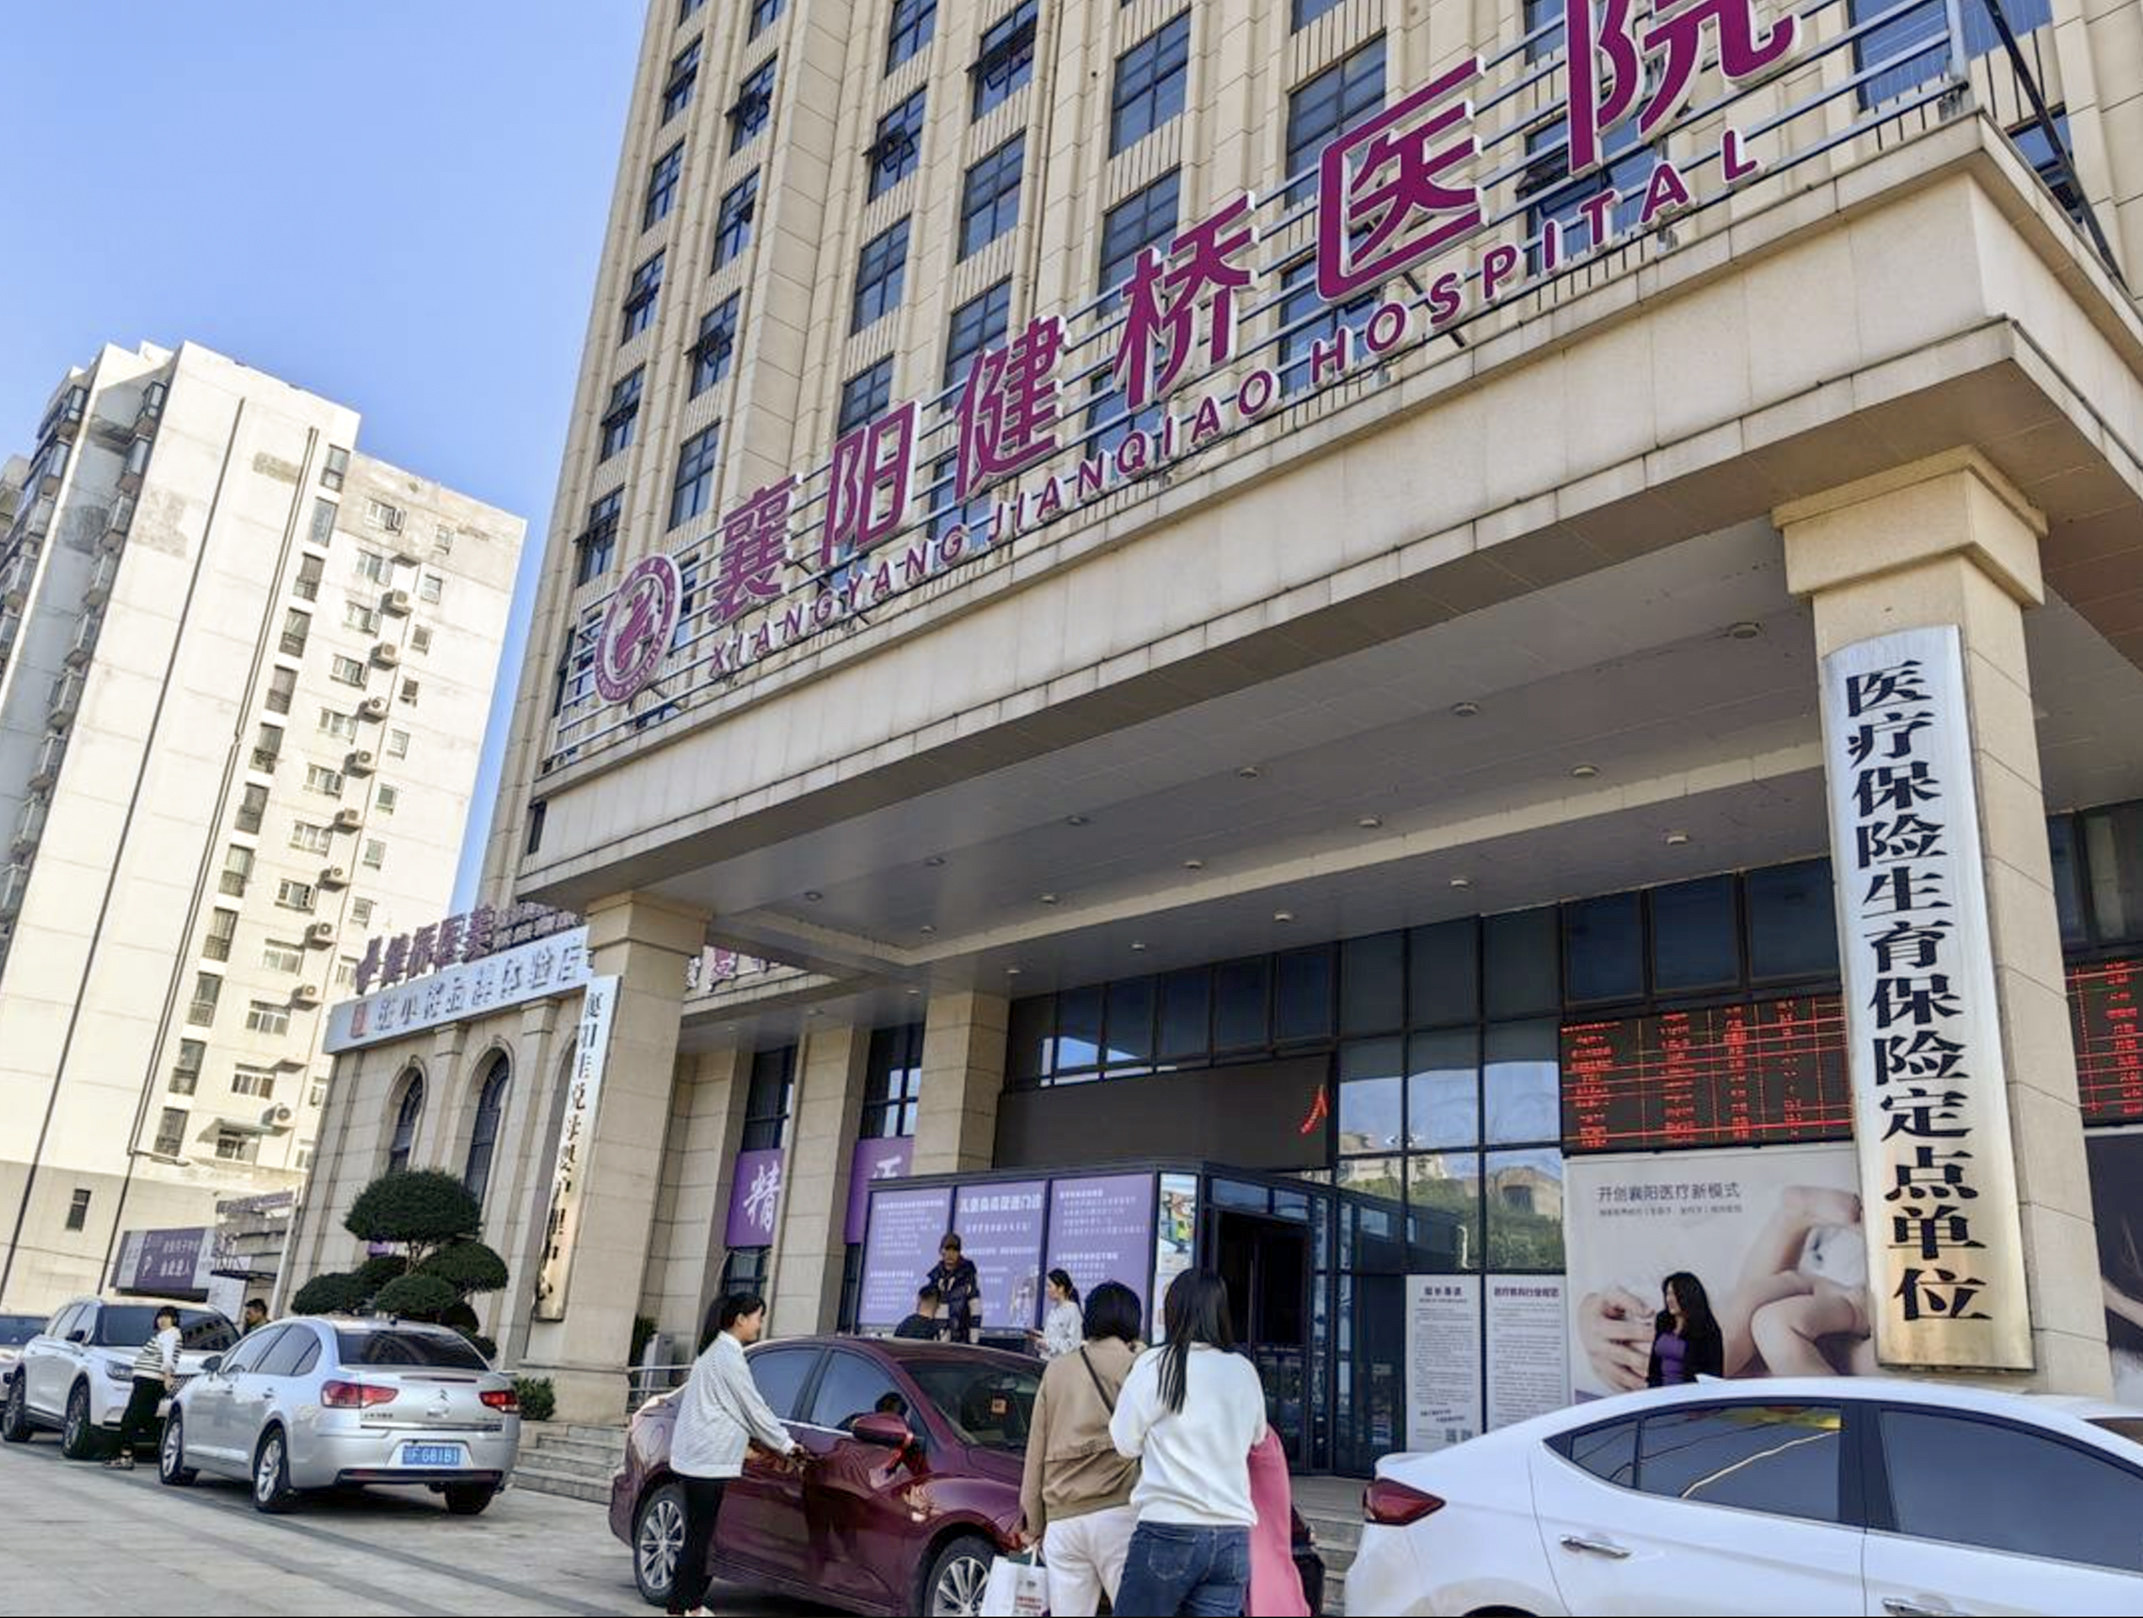 The Jiangiao Hospital in Xiangyany is at the centre of the scandal. Photo:  weixin /@Jinyun 